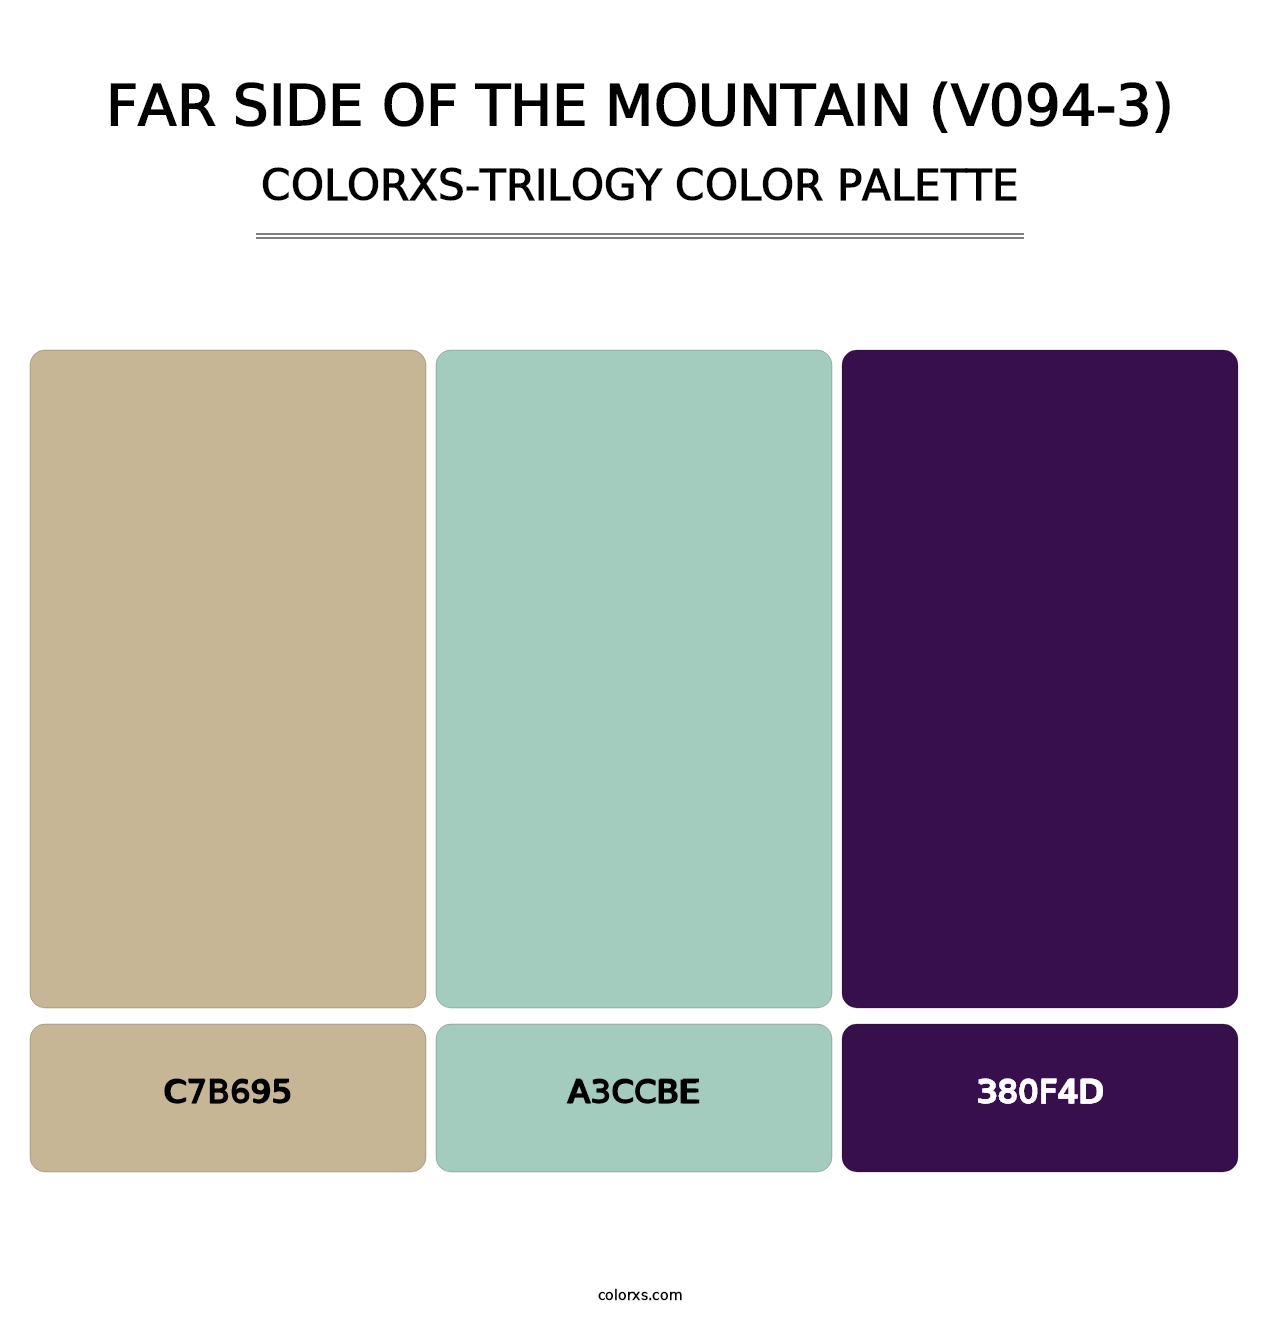 Far Side of the Mountain (V094-3) - Colorxs Trilogy Palette